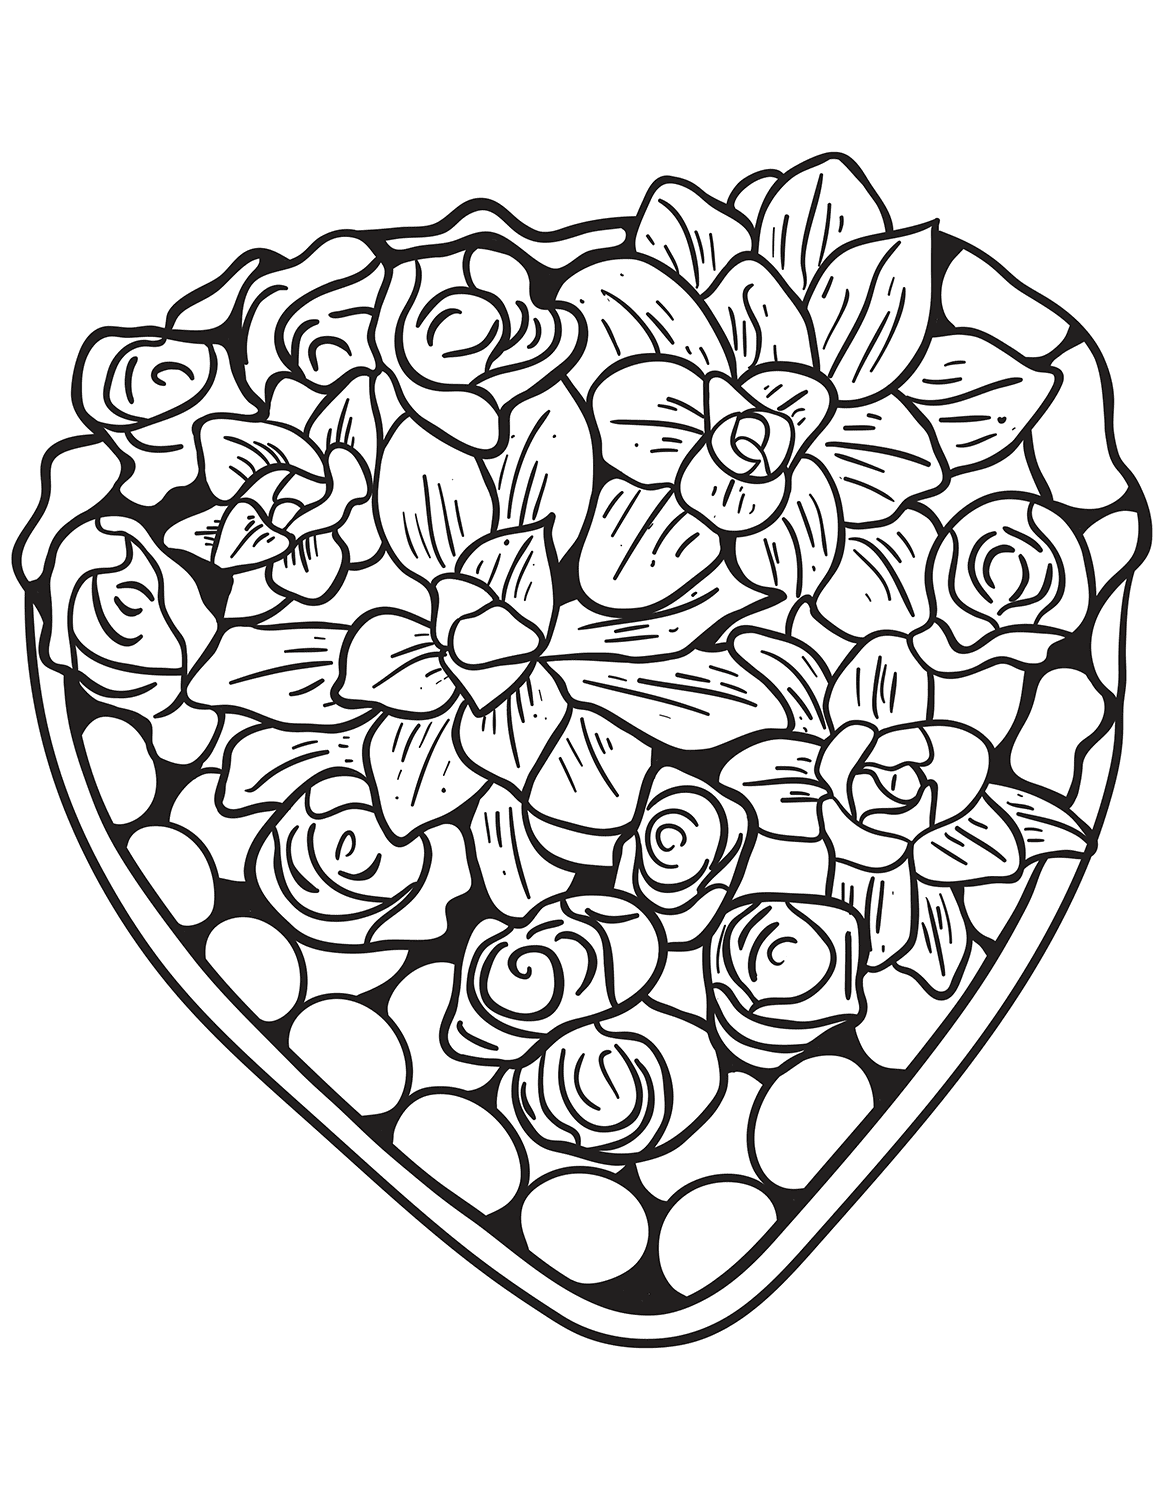 Coloring Pages Of Hearts And Flowers Activity Shelter